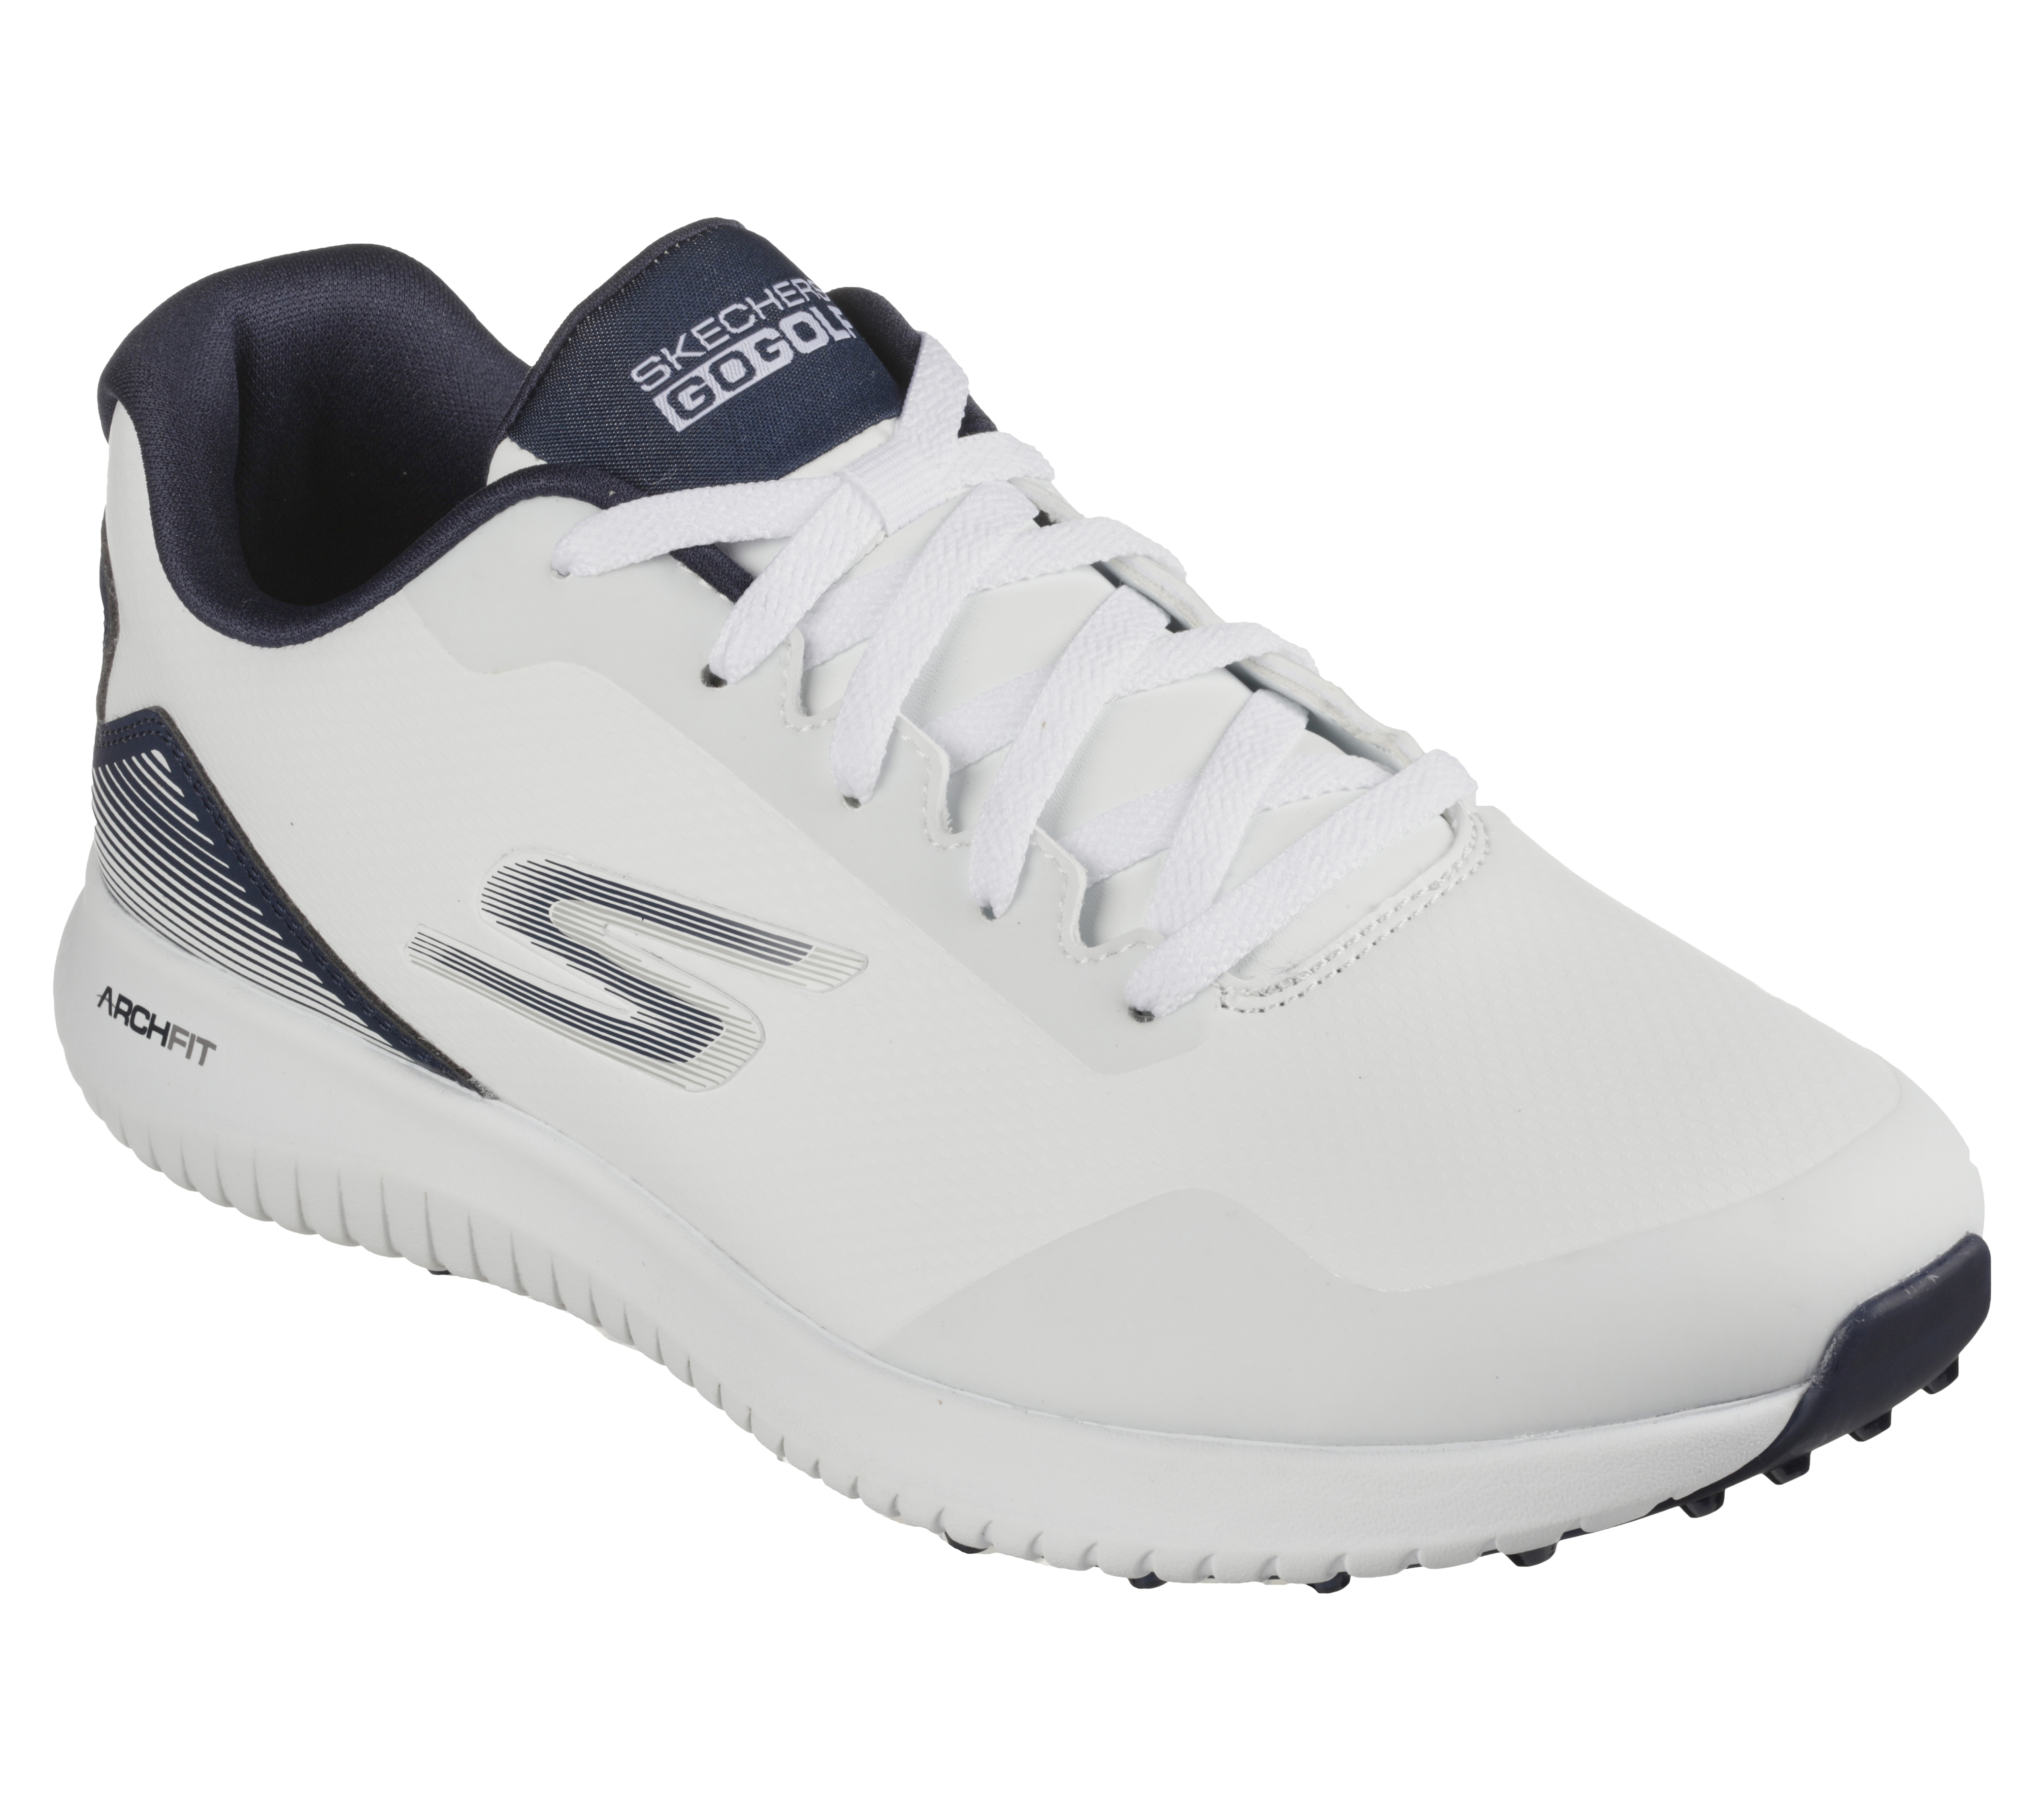 Shop the Arch Fit GO GOLF Max 2